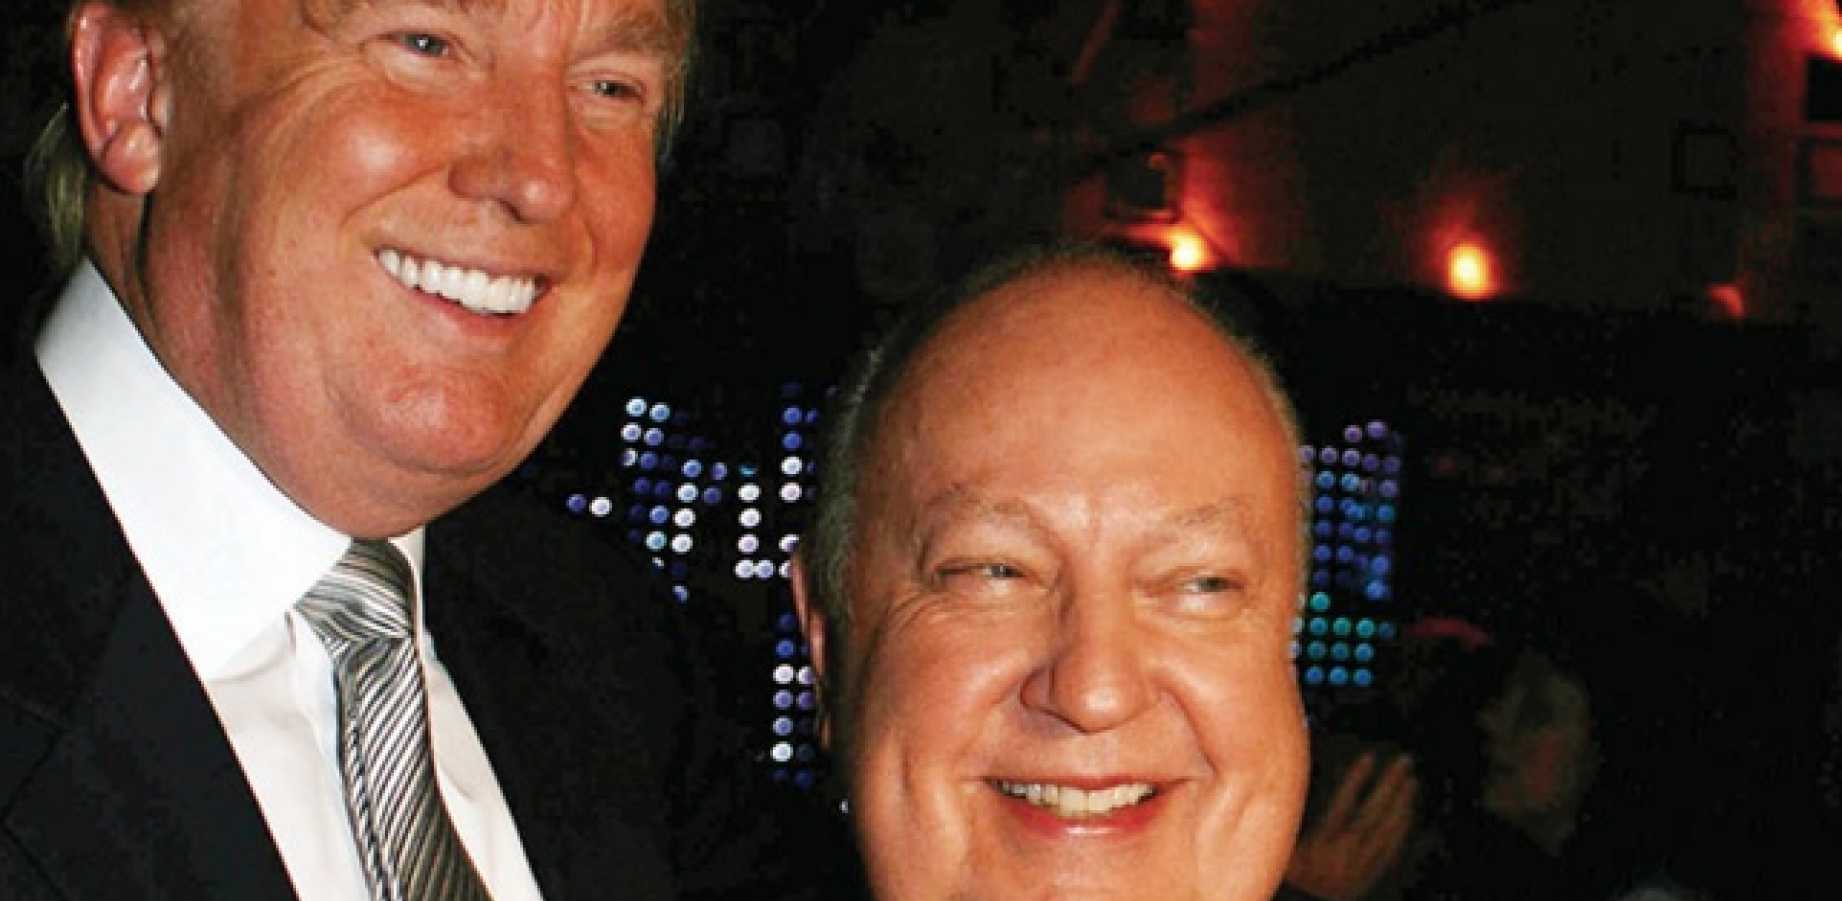 Trump (L) and Ailes (R)